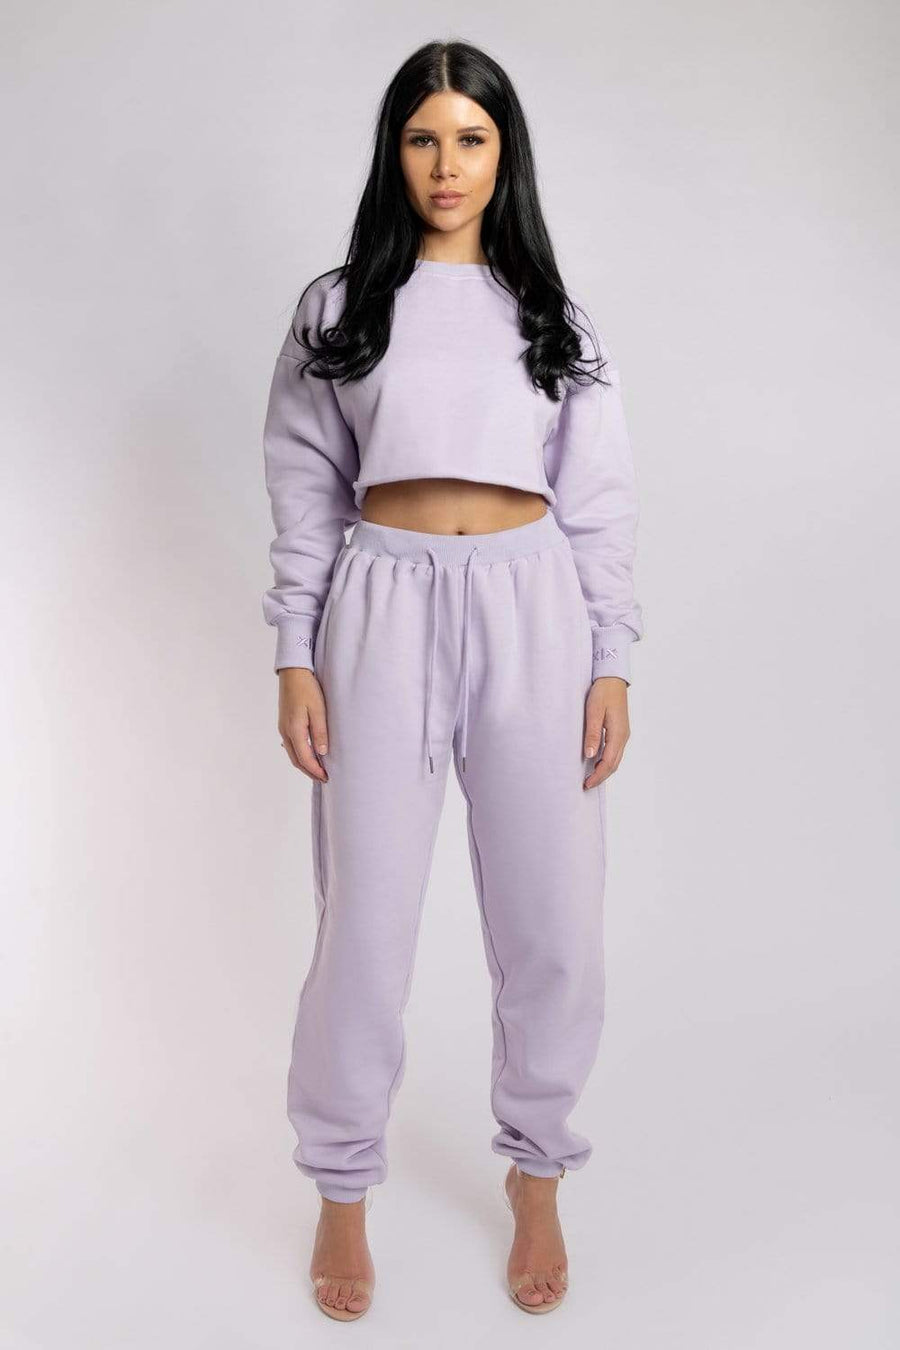 Oversized Jogger Bottoms - Lilac Jogger bottoms